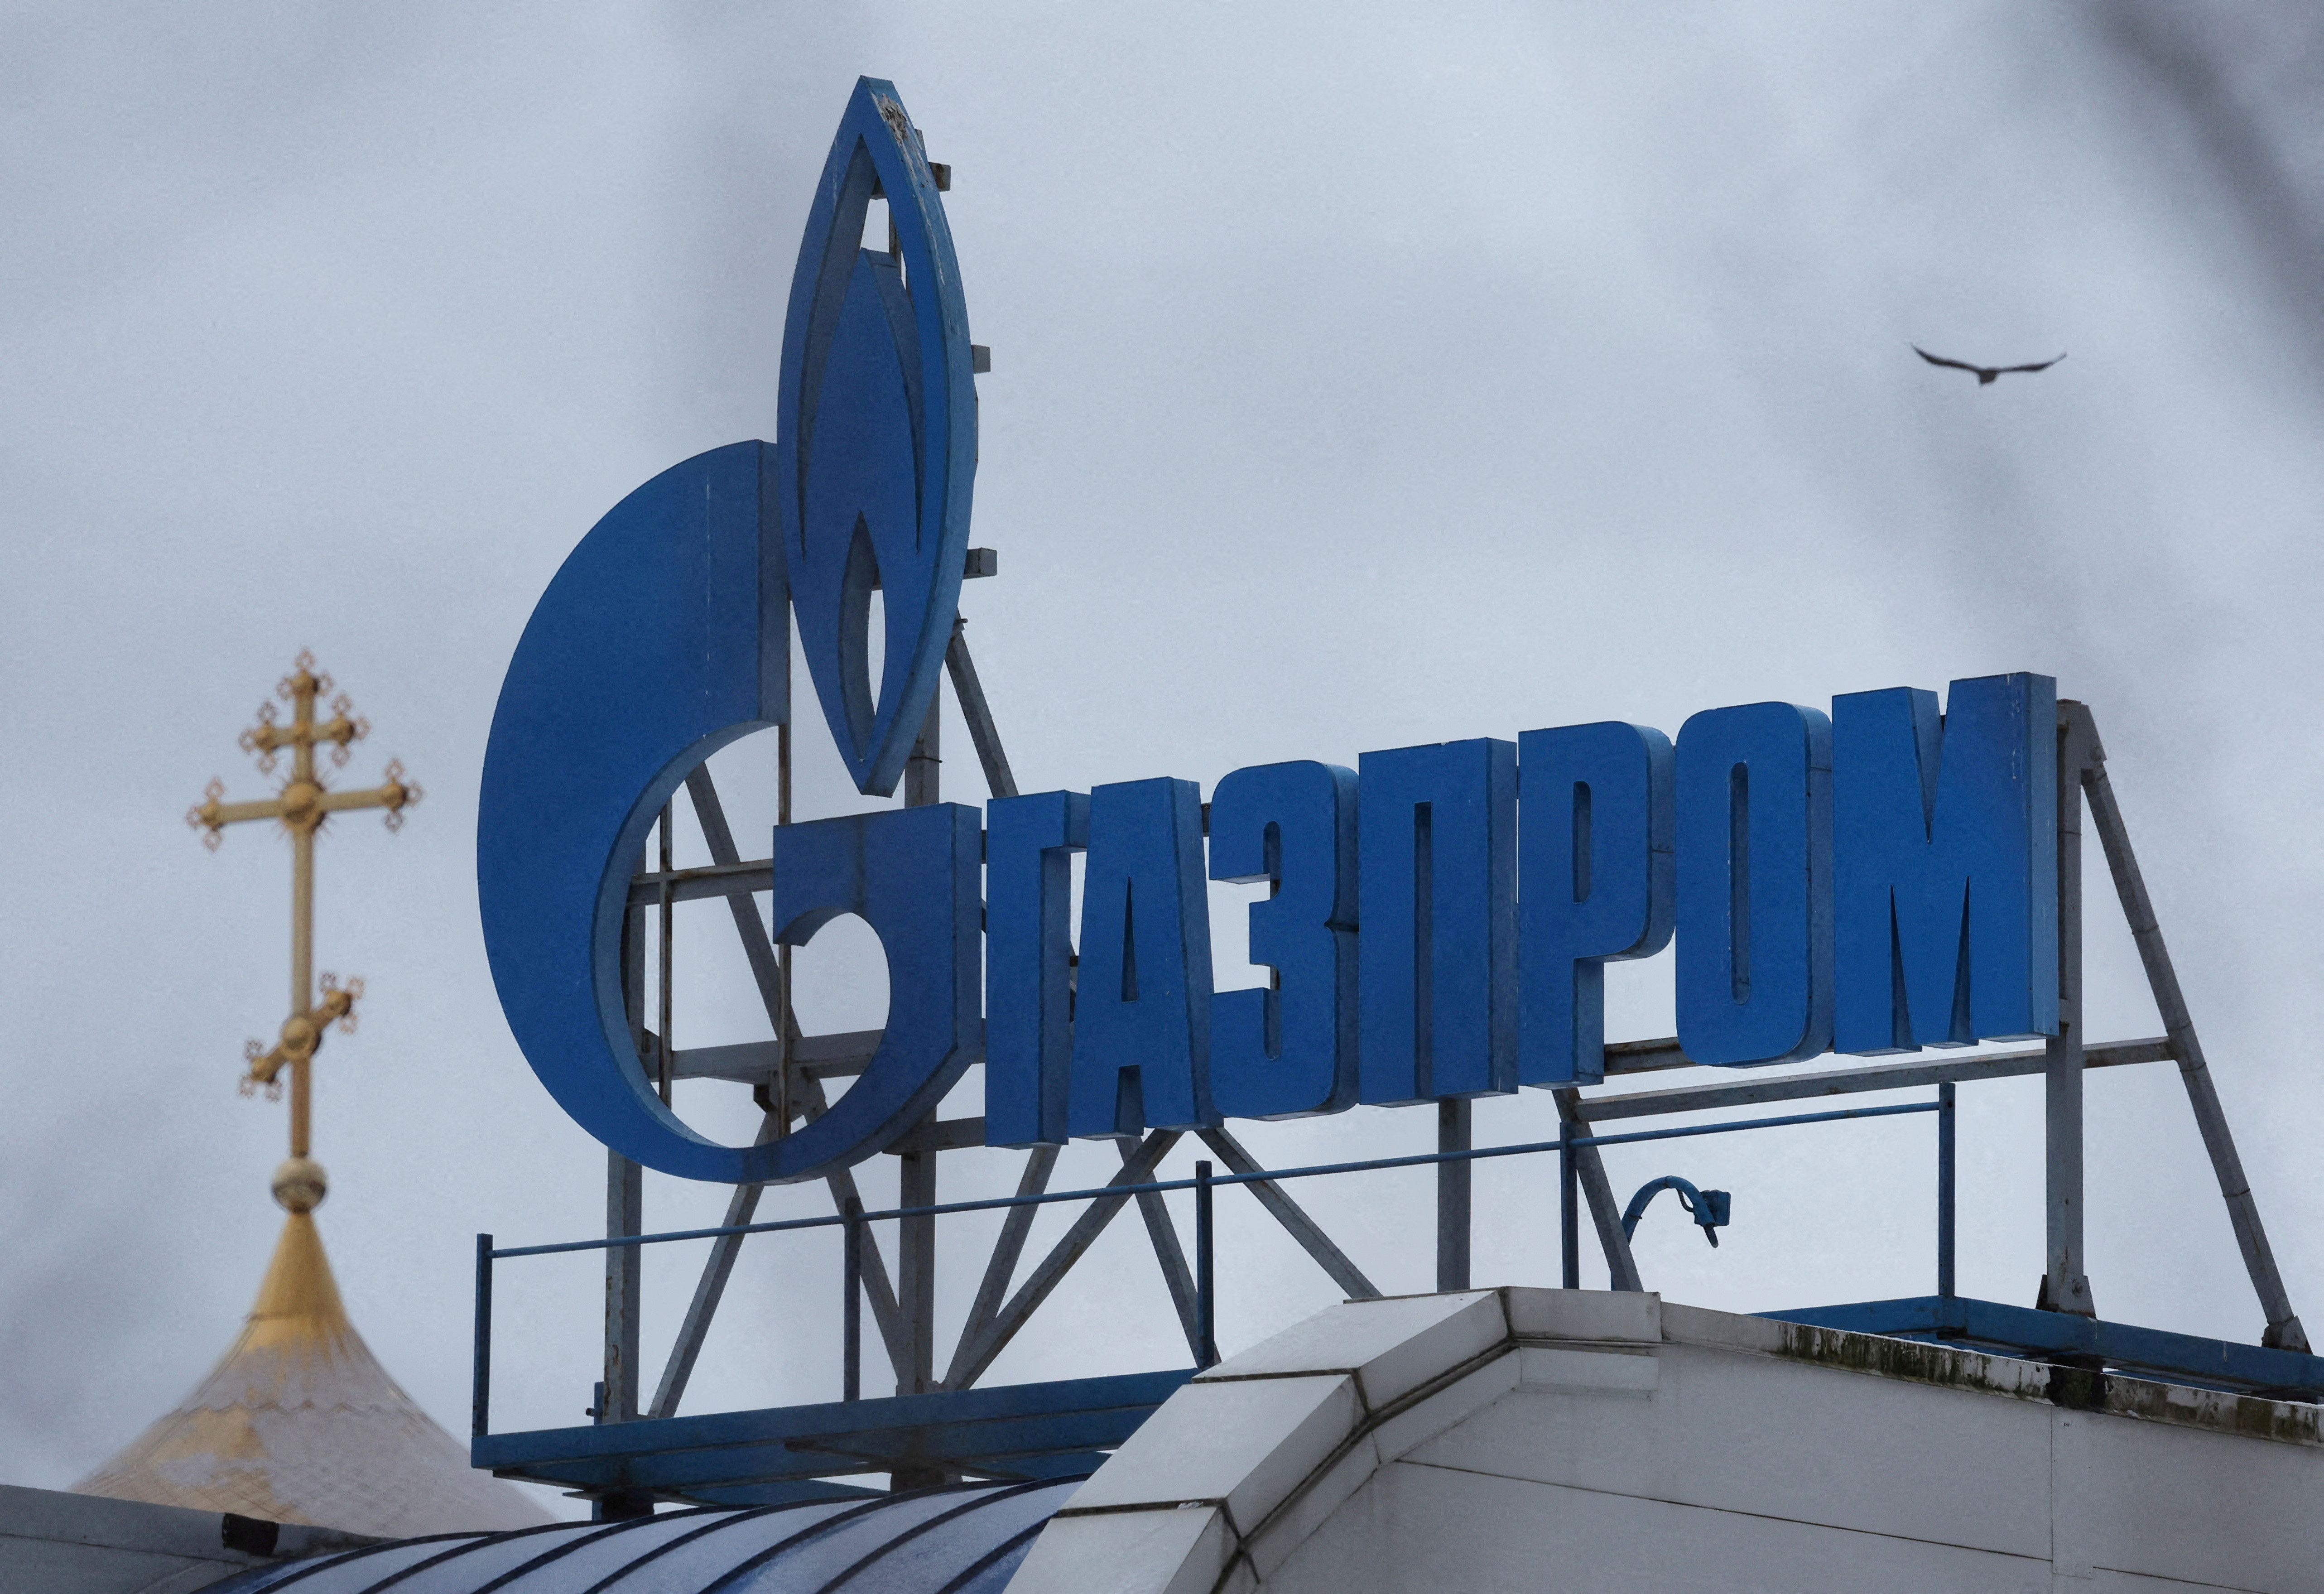 A view shows the Gazprom logo installed on the roof of building in Saint Petersburg